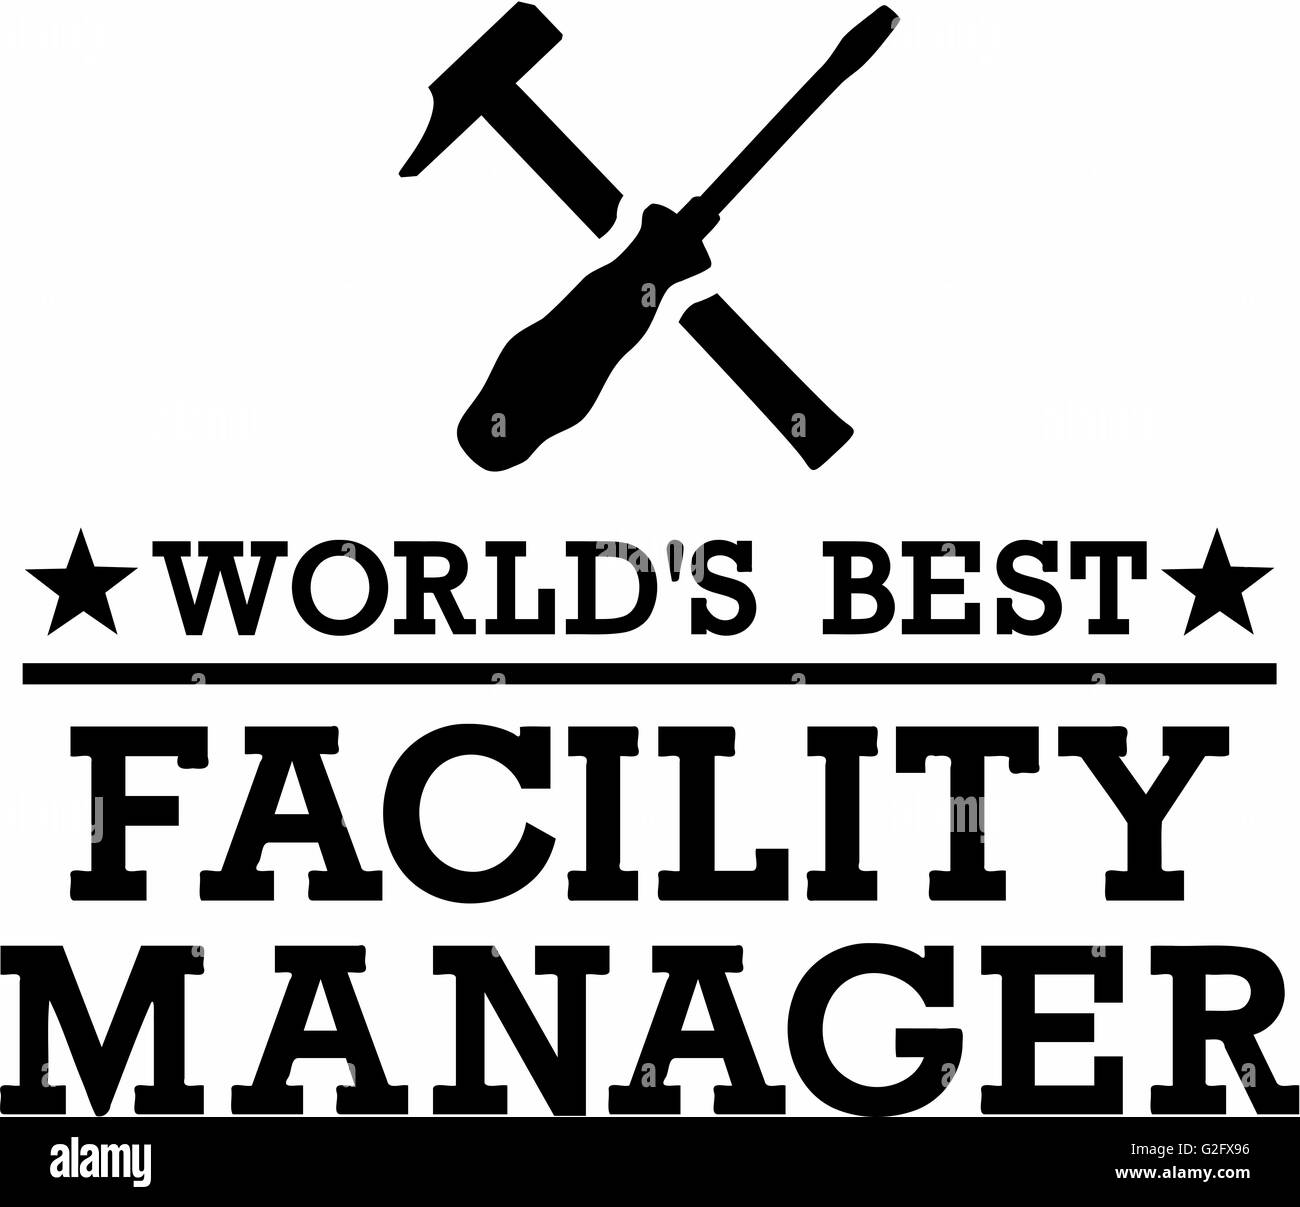 World's Best Facility Manager Stock Photo - Alamy